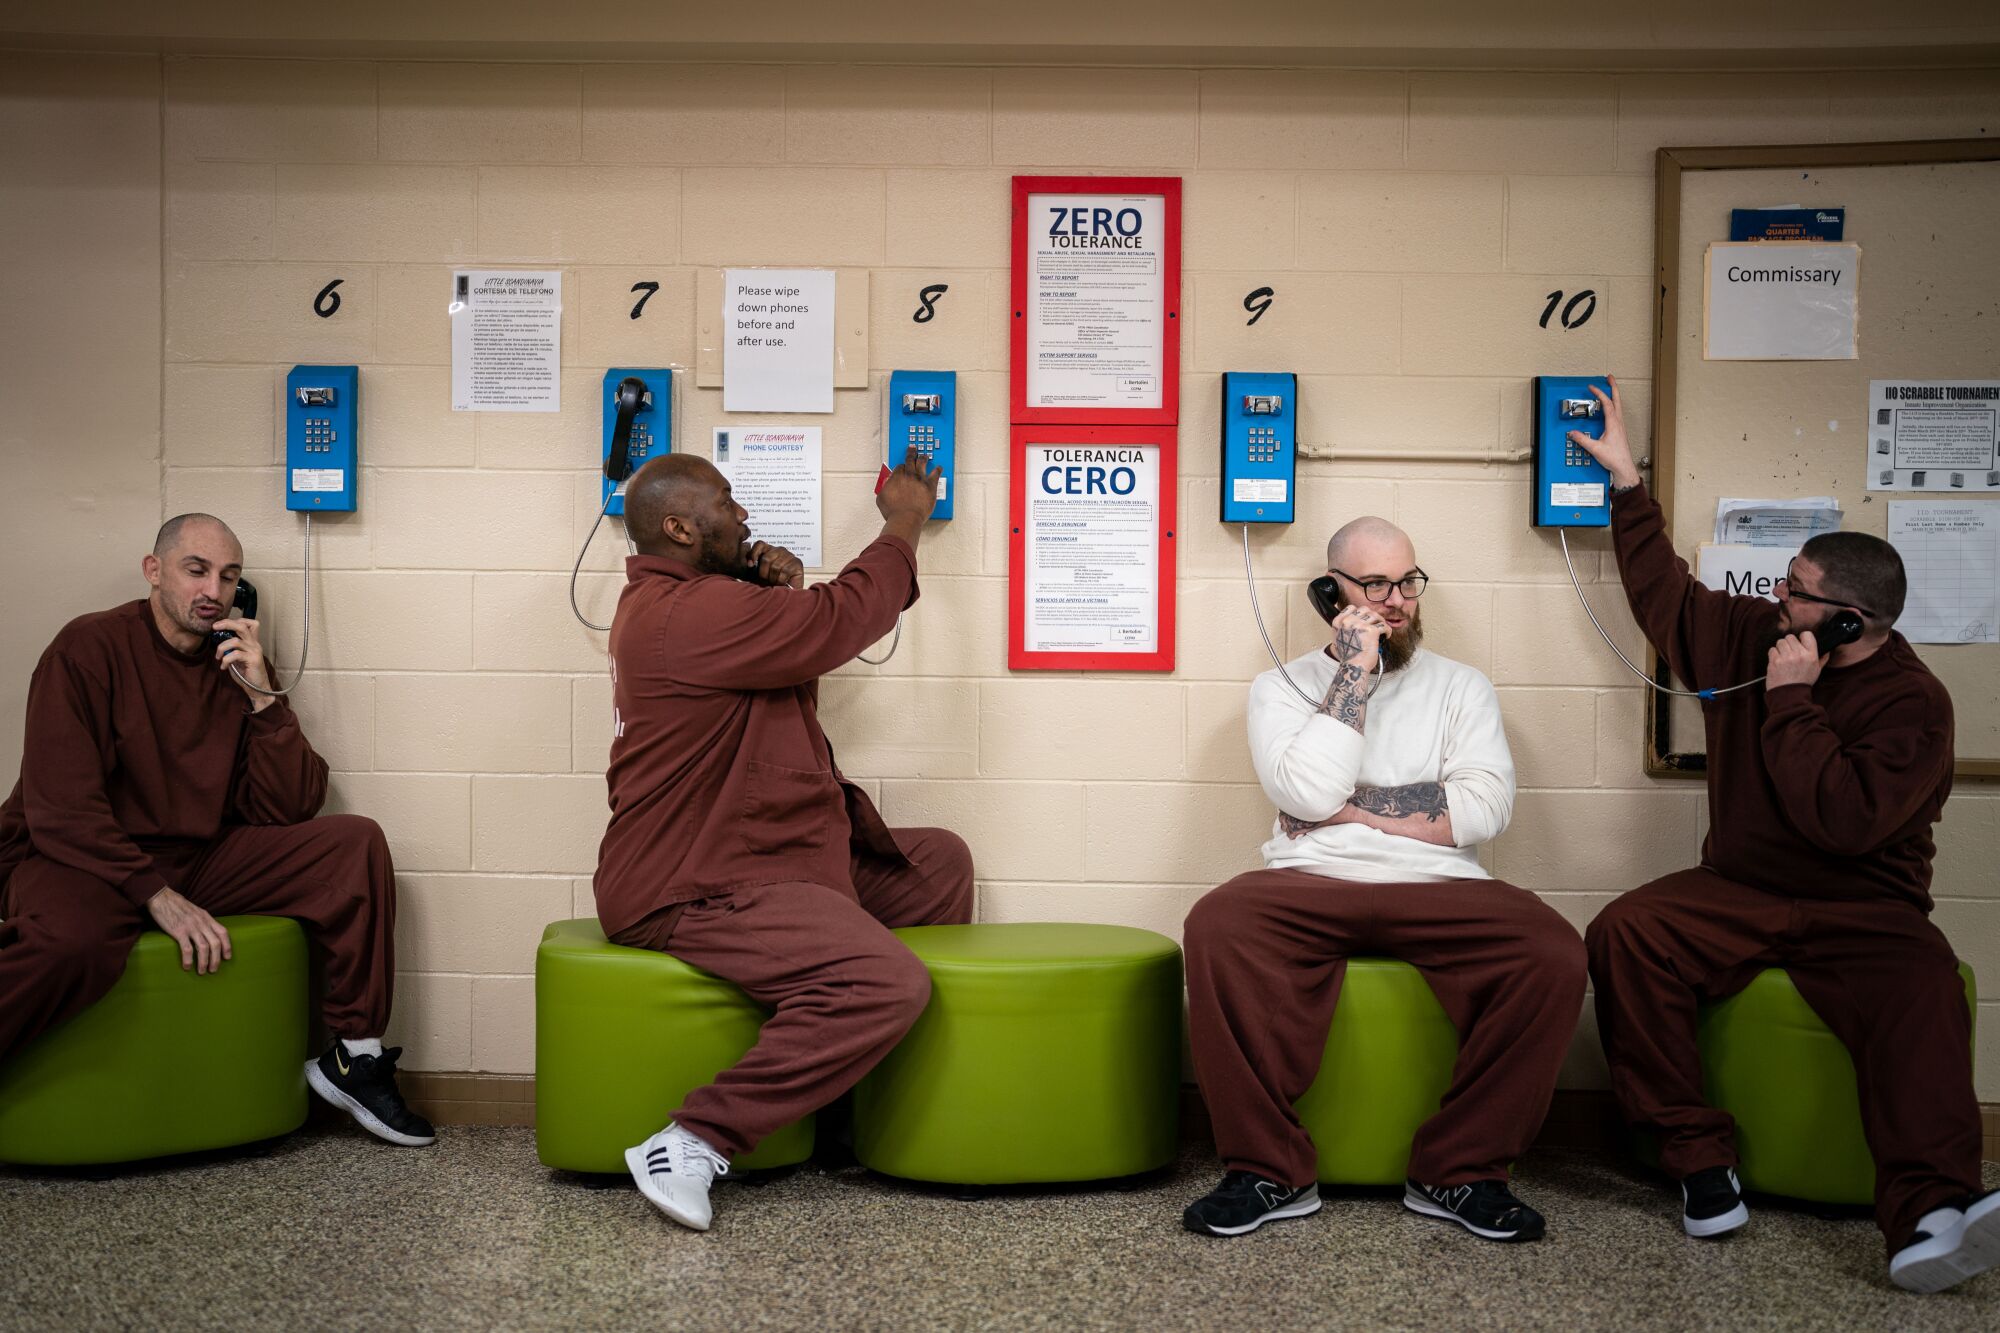 Inmates in the "Little Scandinavia" unit make phone calls in a relaxed setting.